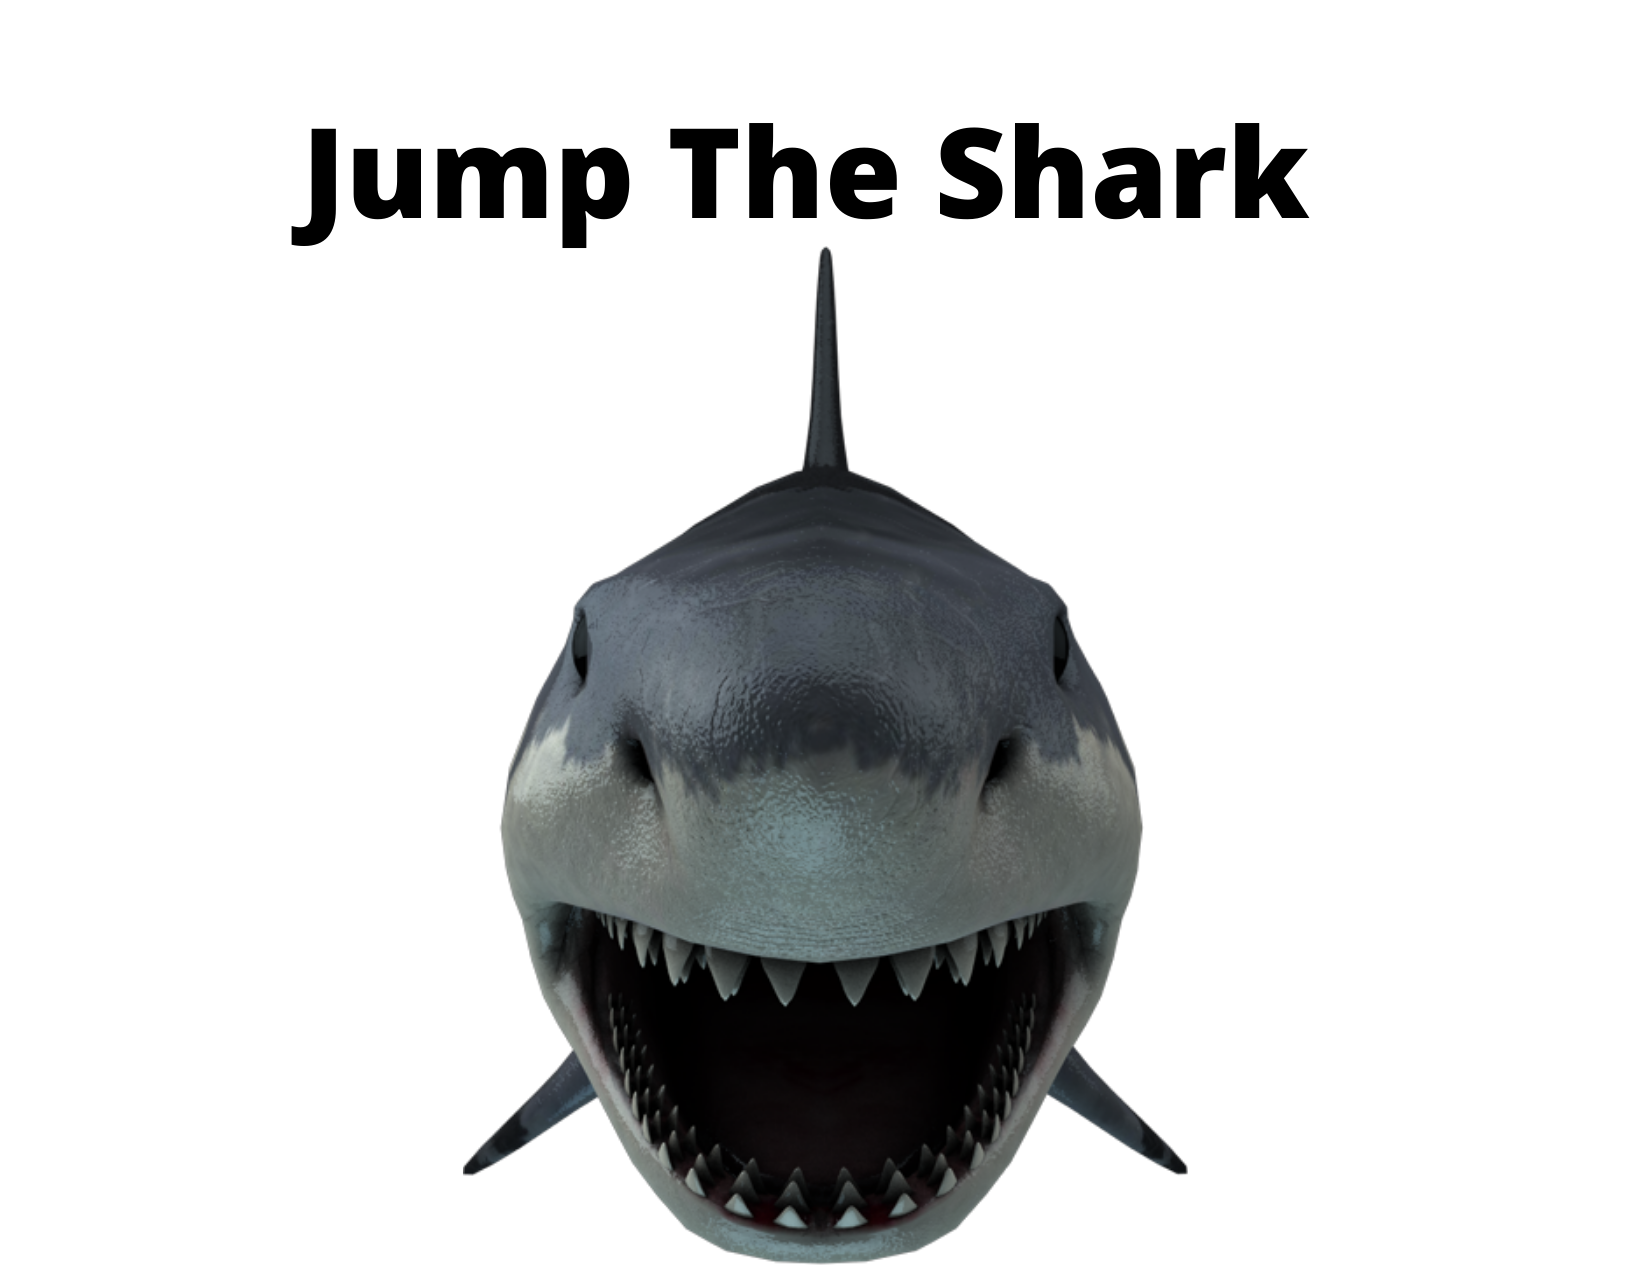 A picture of a shark and the words "jump the shark"